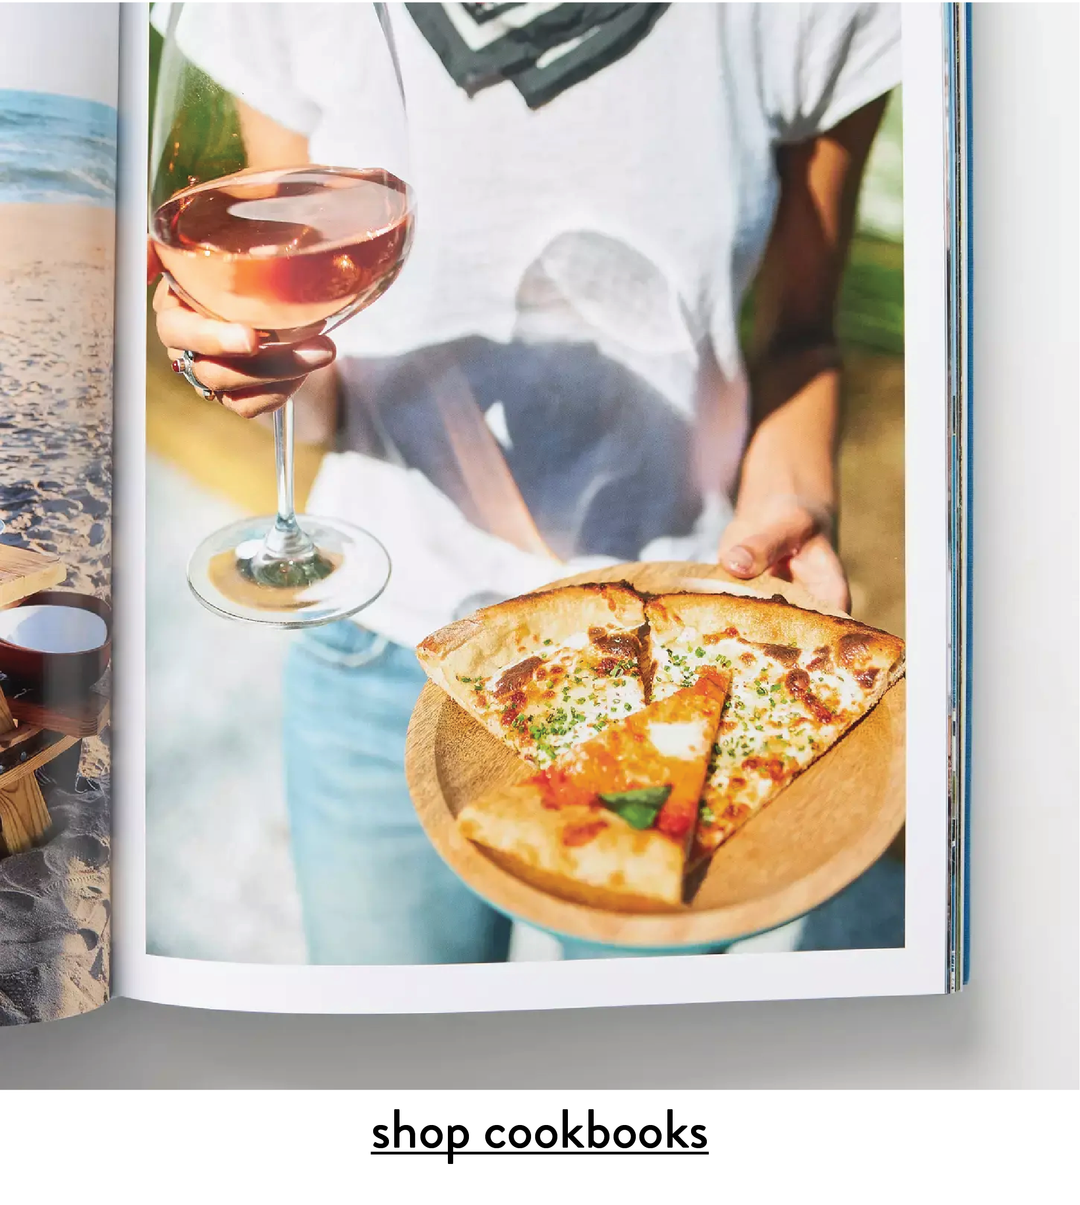 cook books hosting gifts beautiful food photography